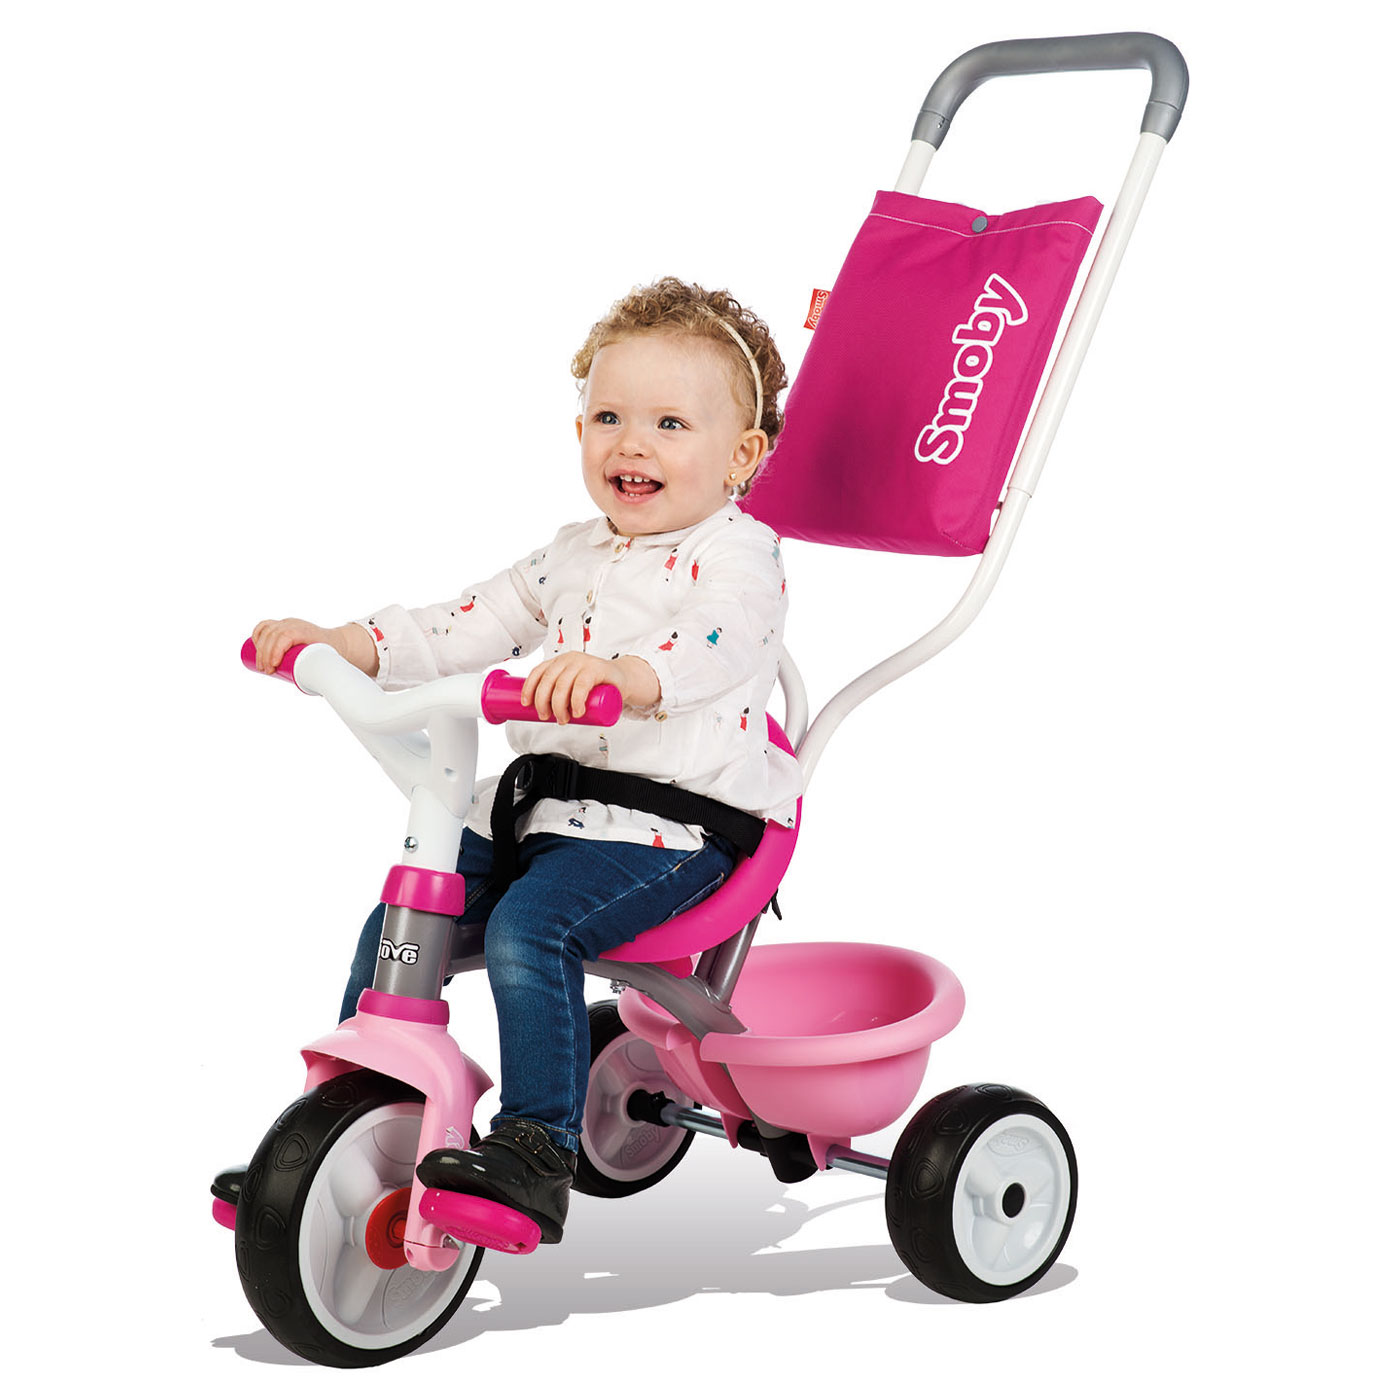 Smoby Be Move Comfort Driewieler 3in1 - Roze